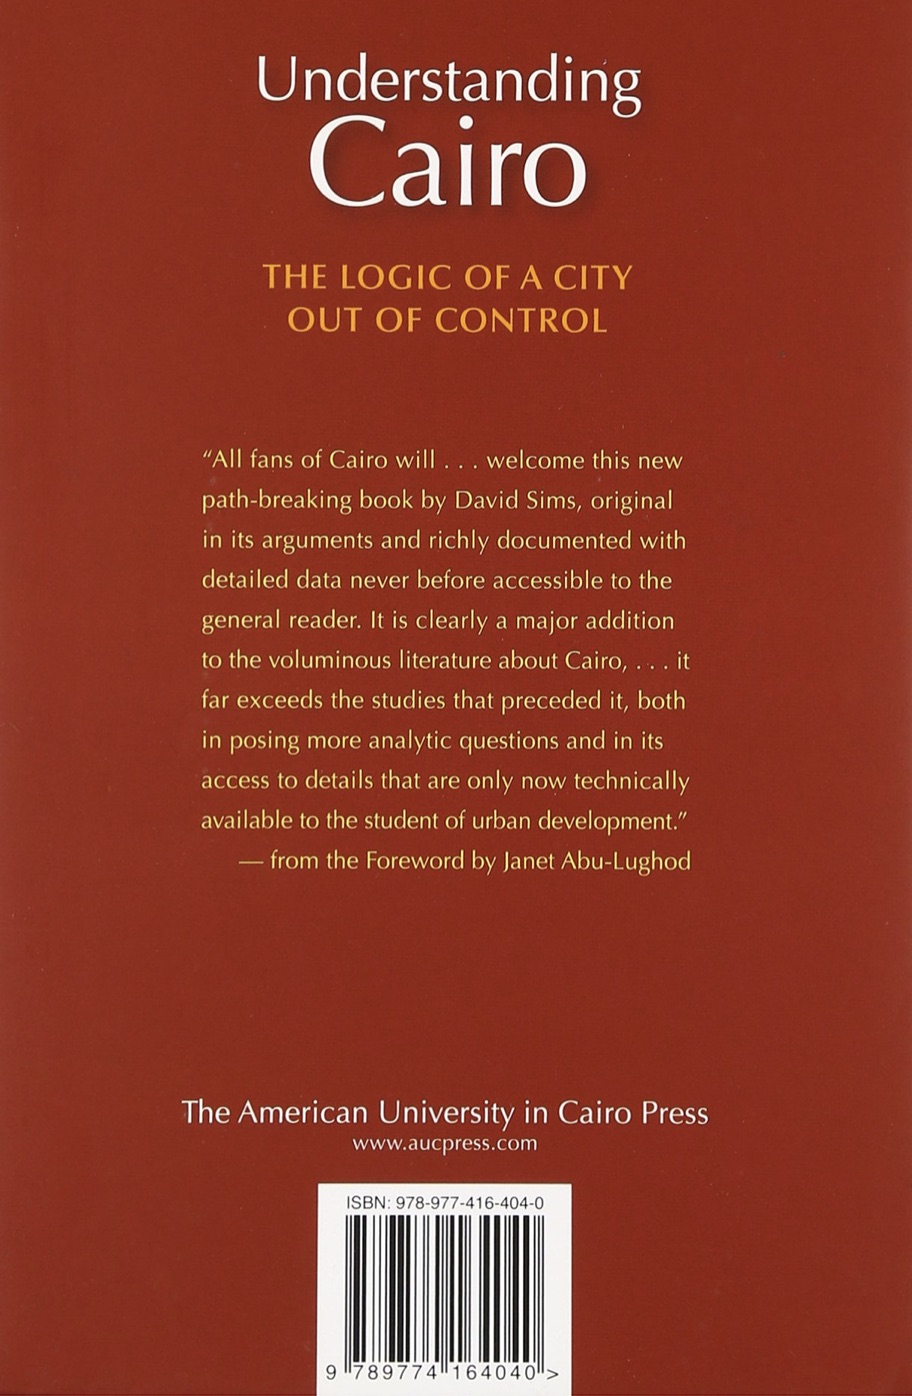  Understanding Cairo: The Logic of a City out of Control - Book Review